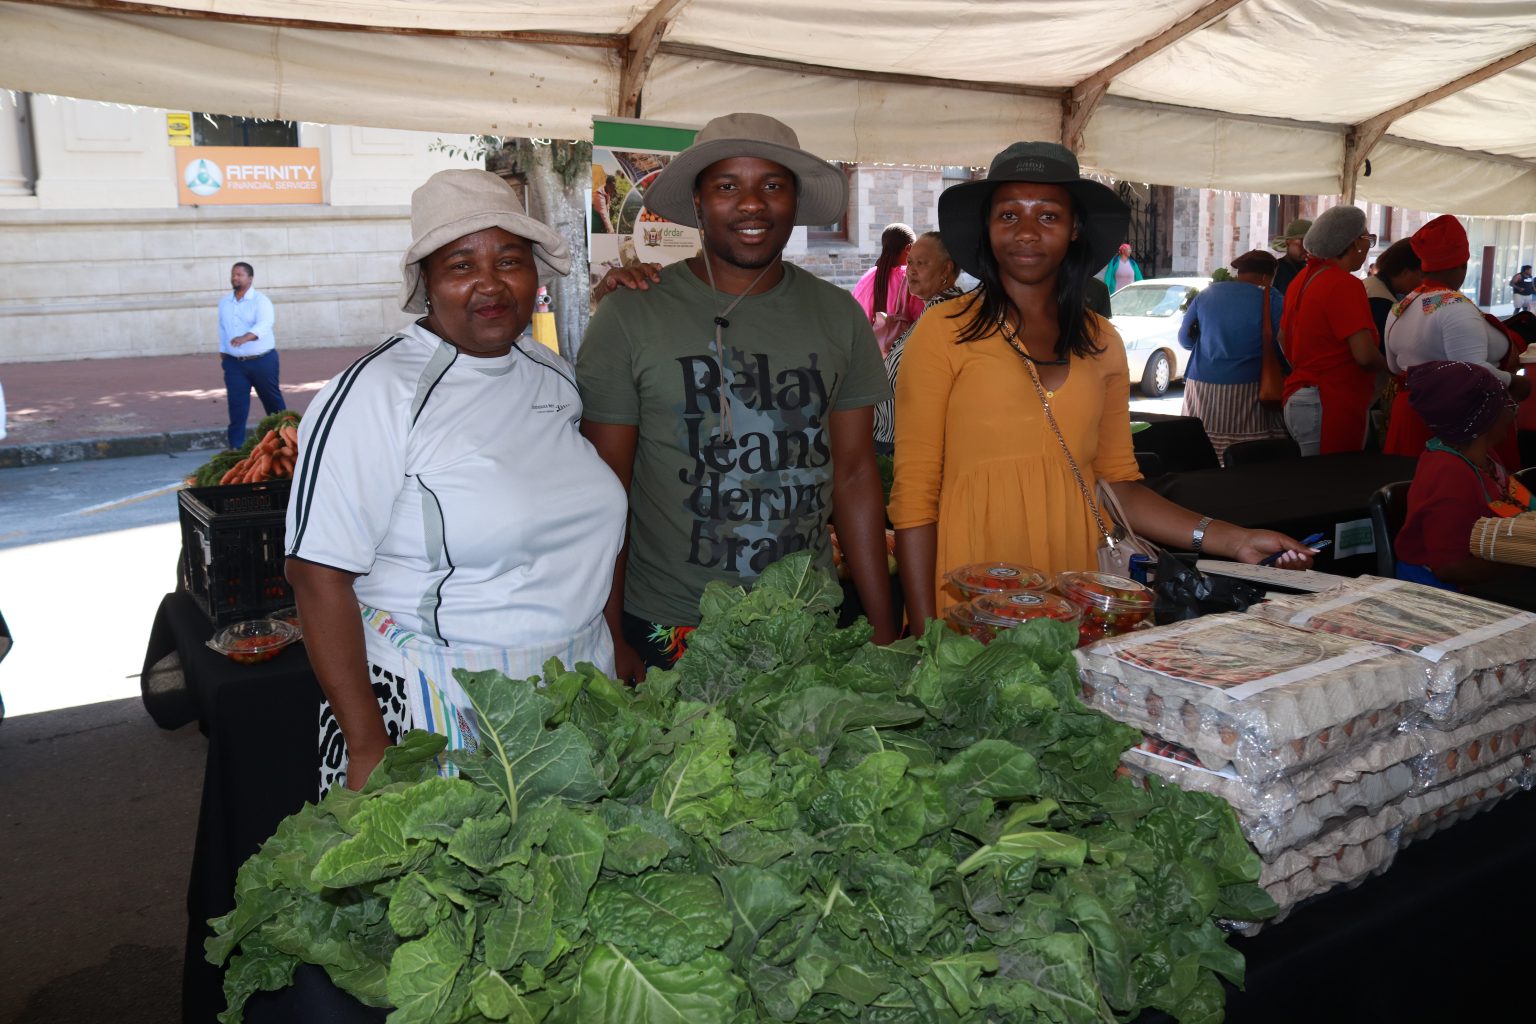 Ilithalethu vegetable producers at the Makhanda and Food Trade Fair on Church Square on Friday 8 March. Photo: Khanyisa Khenese.